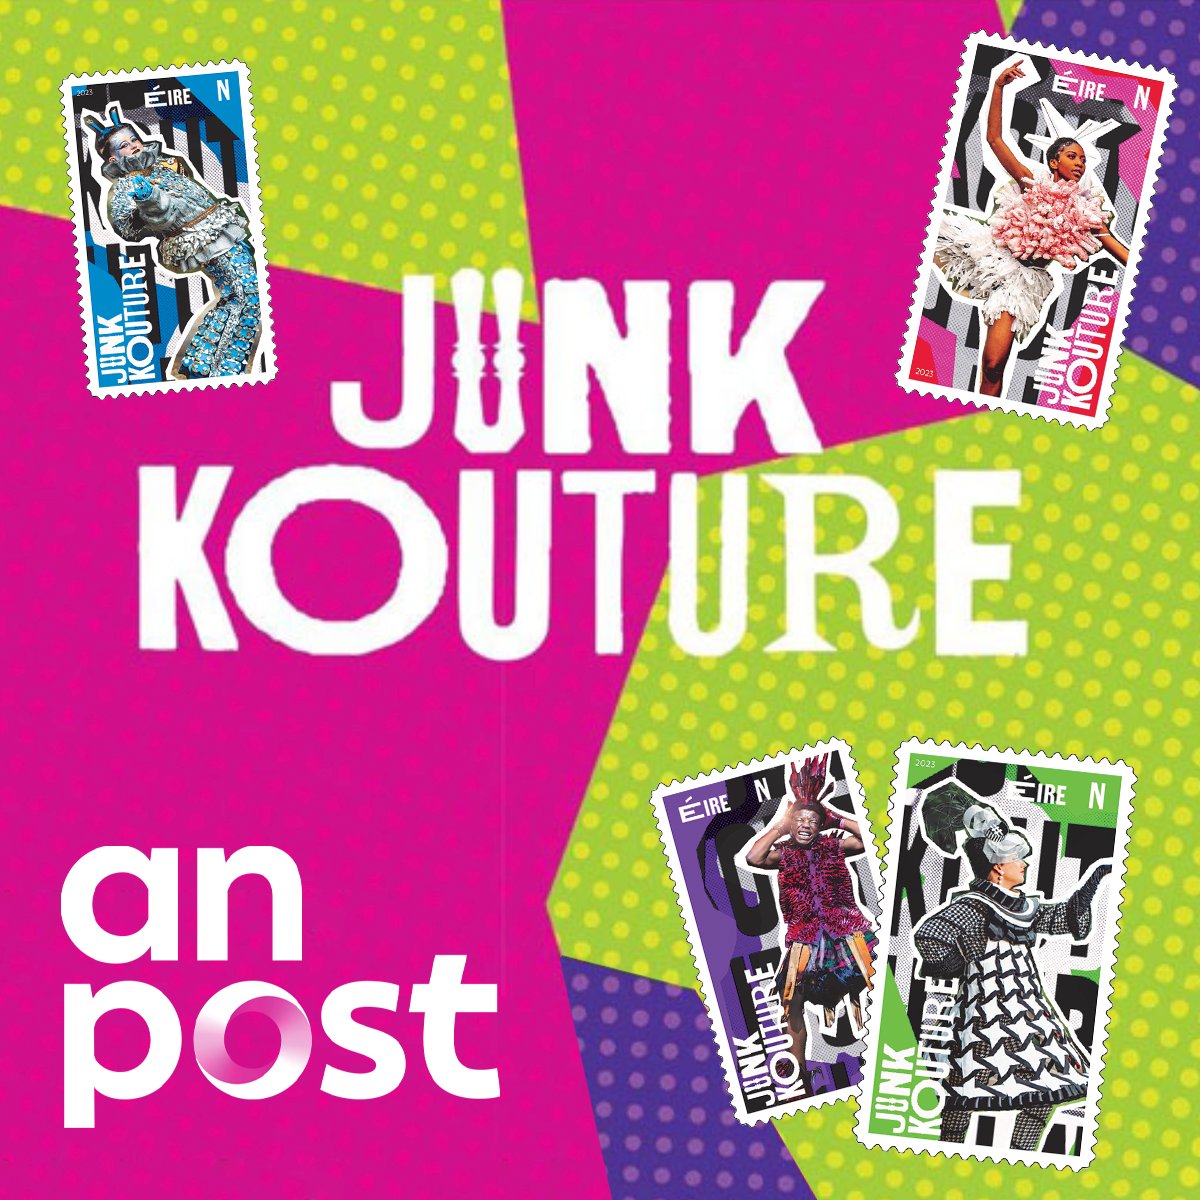 Send Fashion. Send Expression. Send Love. 💌 Junk Kouture stamps with @Postvox have landed!!! These striking stamps, which allow postage within Ireland are available at anpost.com/junkkouture and in selected post offices nationwide 💫